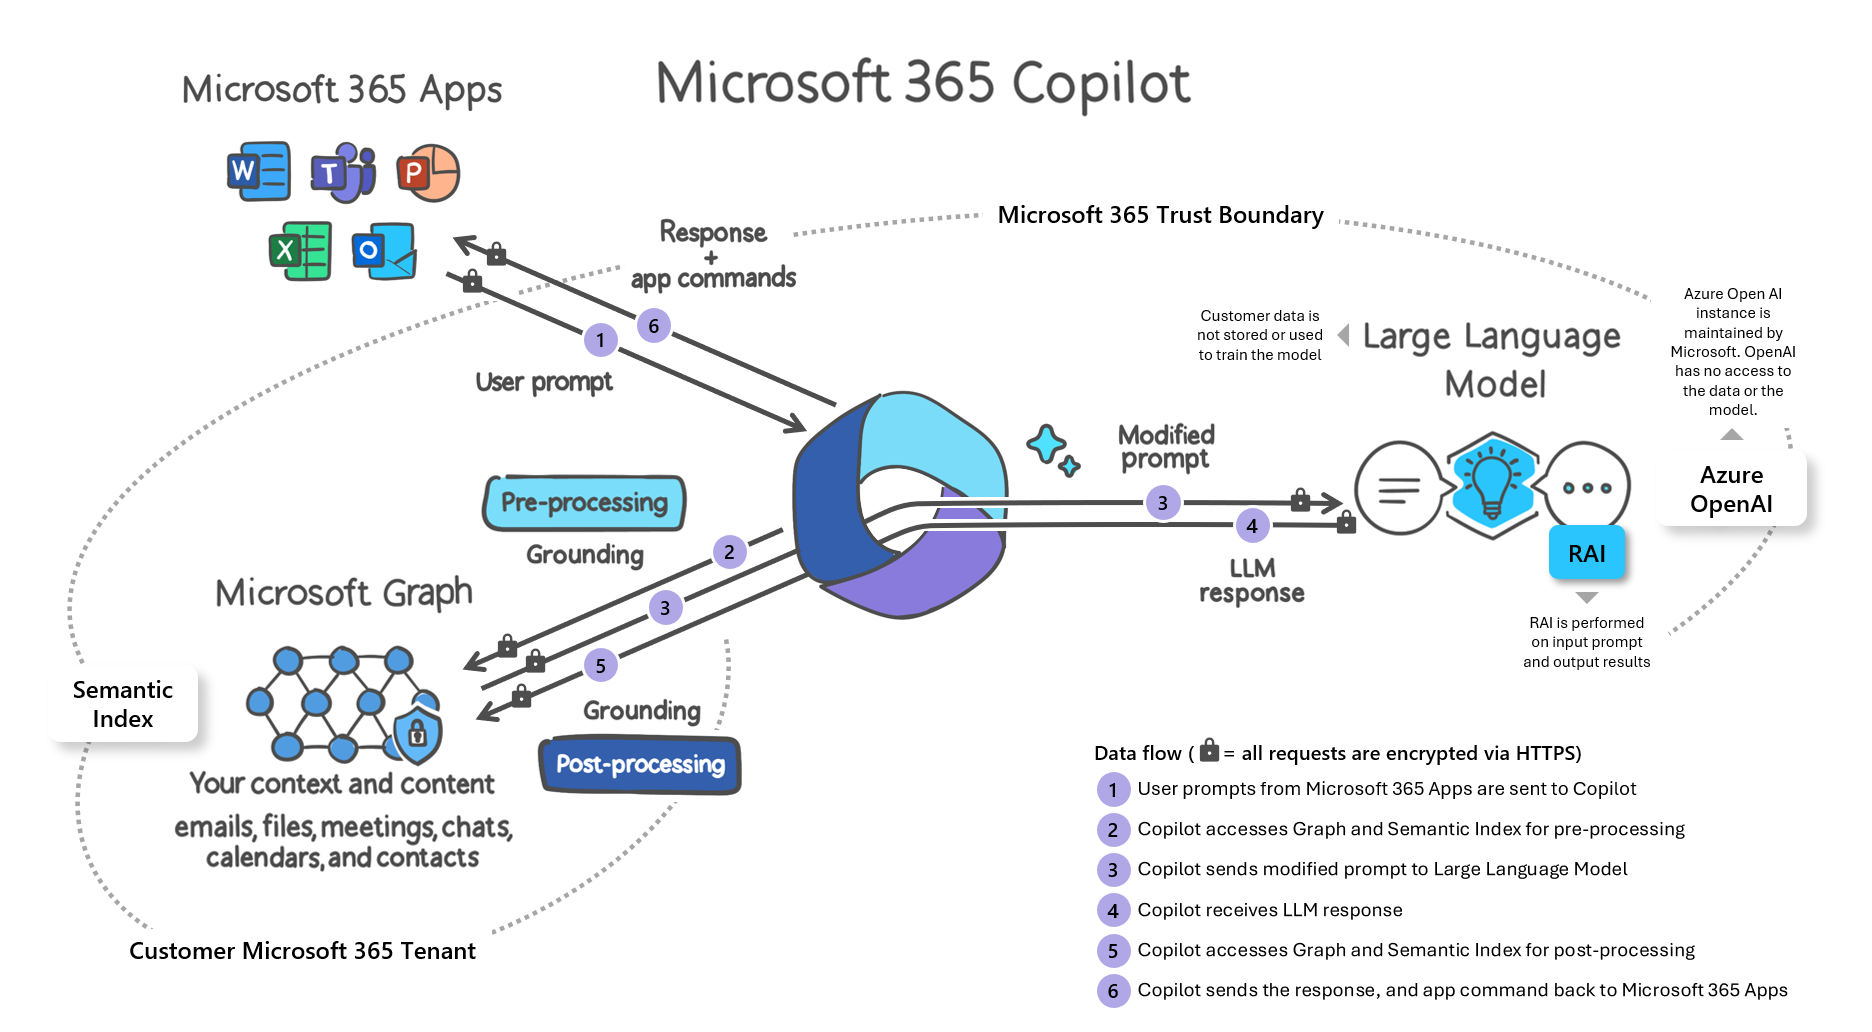 Diagram that shows the relationship among the components of Microsoft 365 Copilot, such as Microsoft Graph and LLM